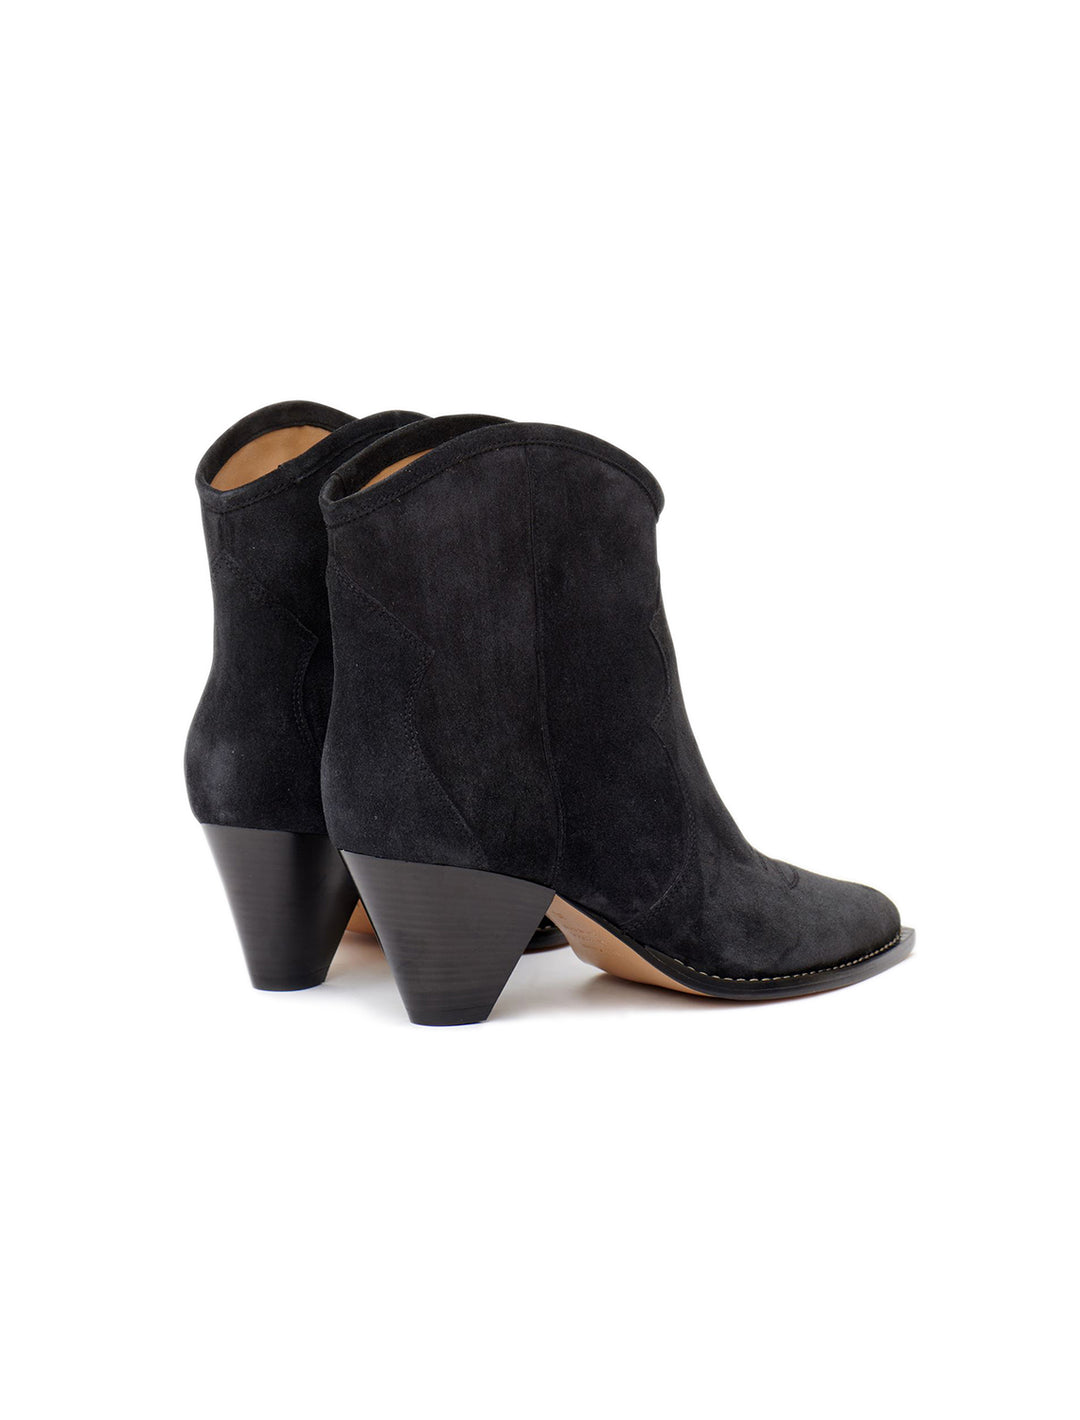 Back angle view of Isabel Marant Etoile's Darizo Boot in Faded Black Suede.